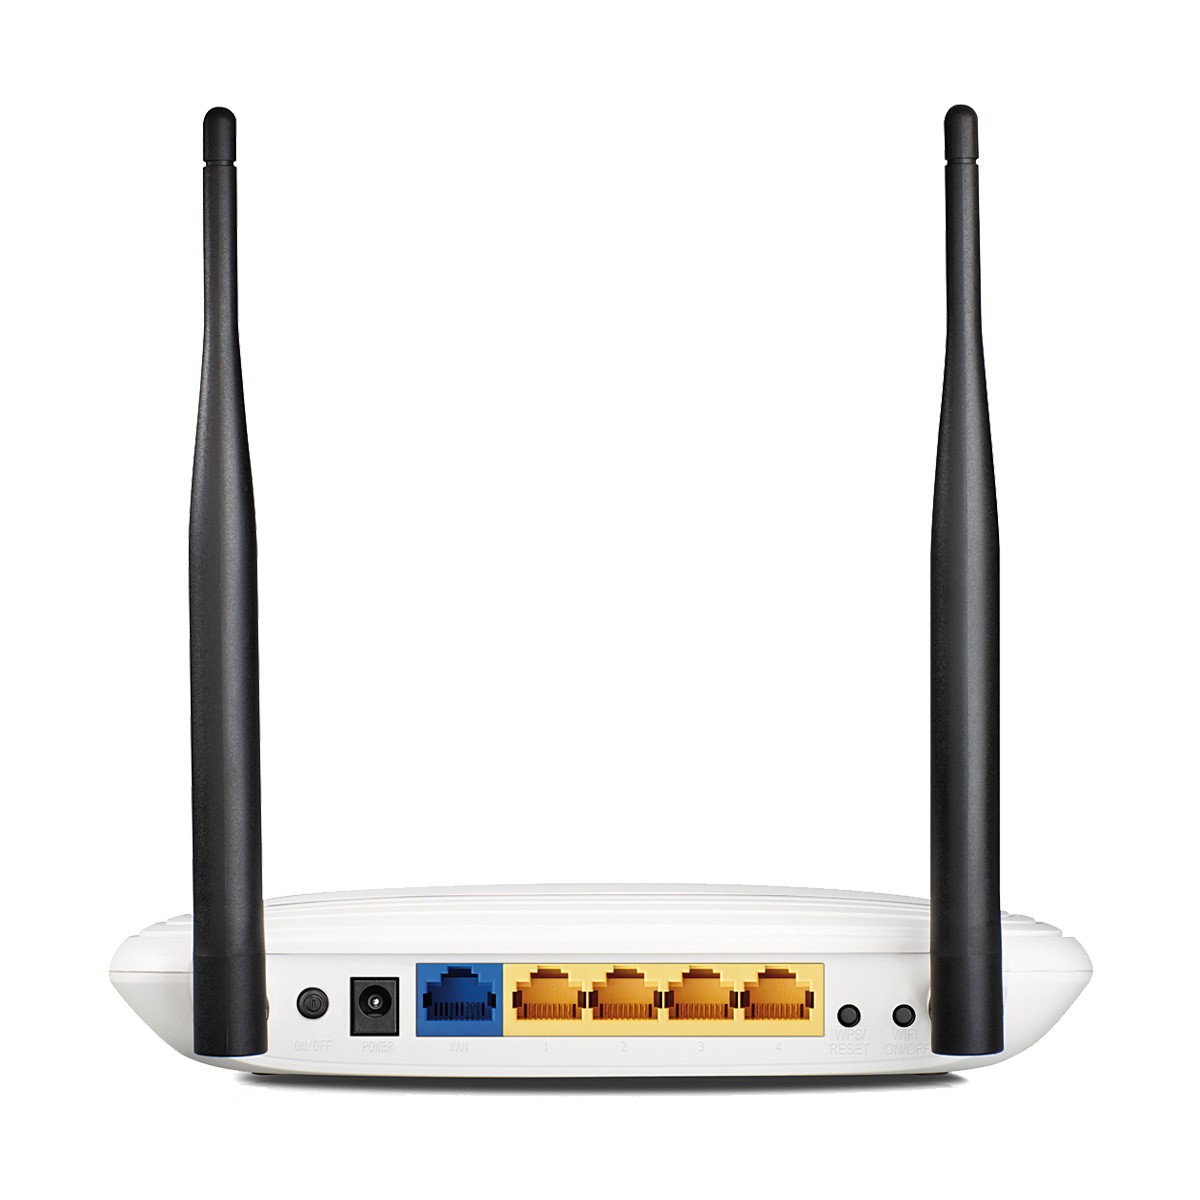 TP-Link TL-WR841N Router Price in Bangladesh, Specifications ...